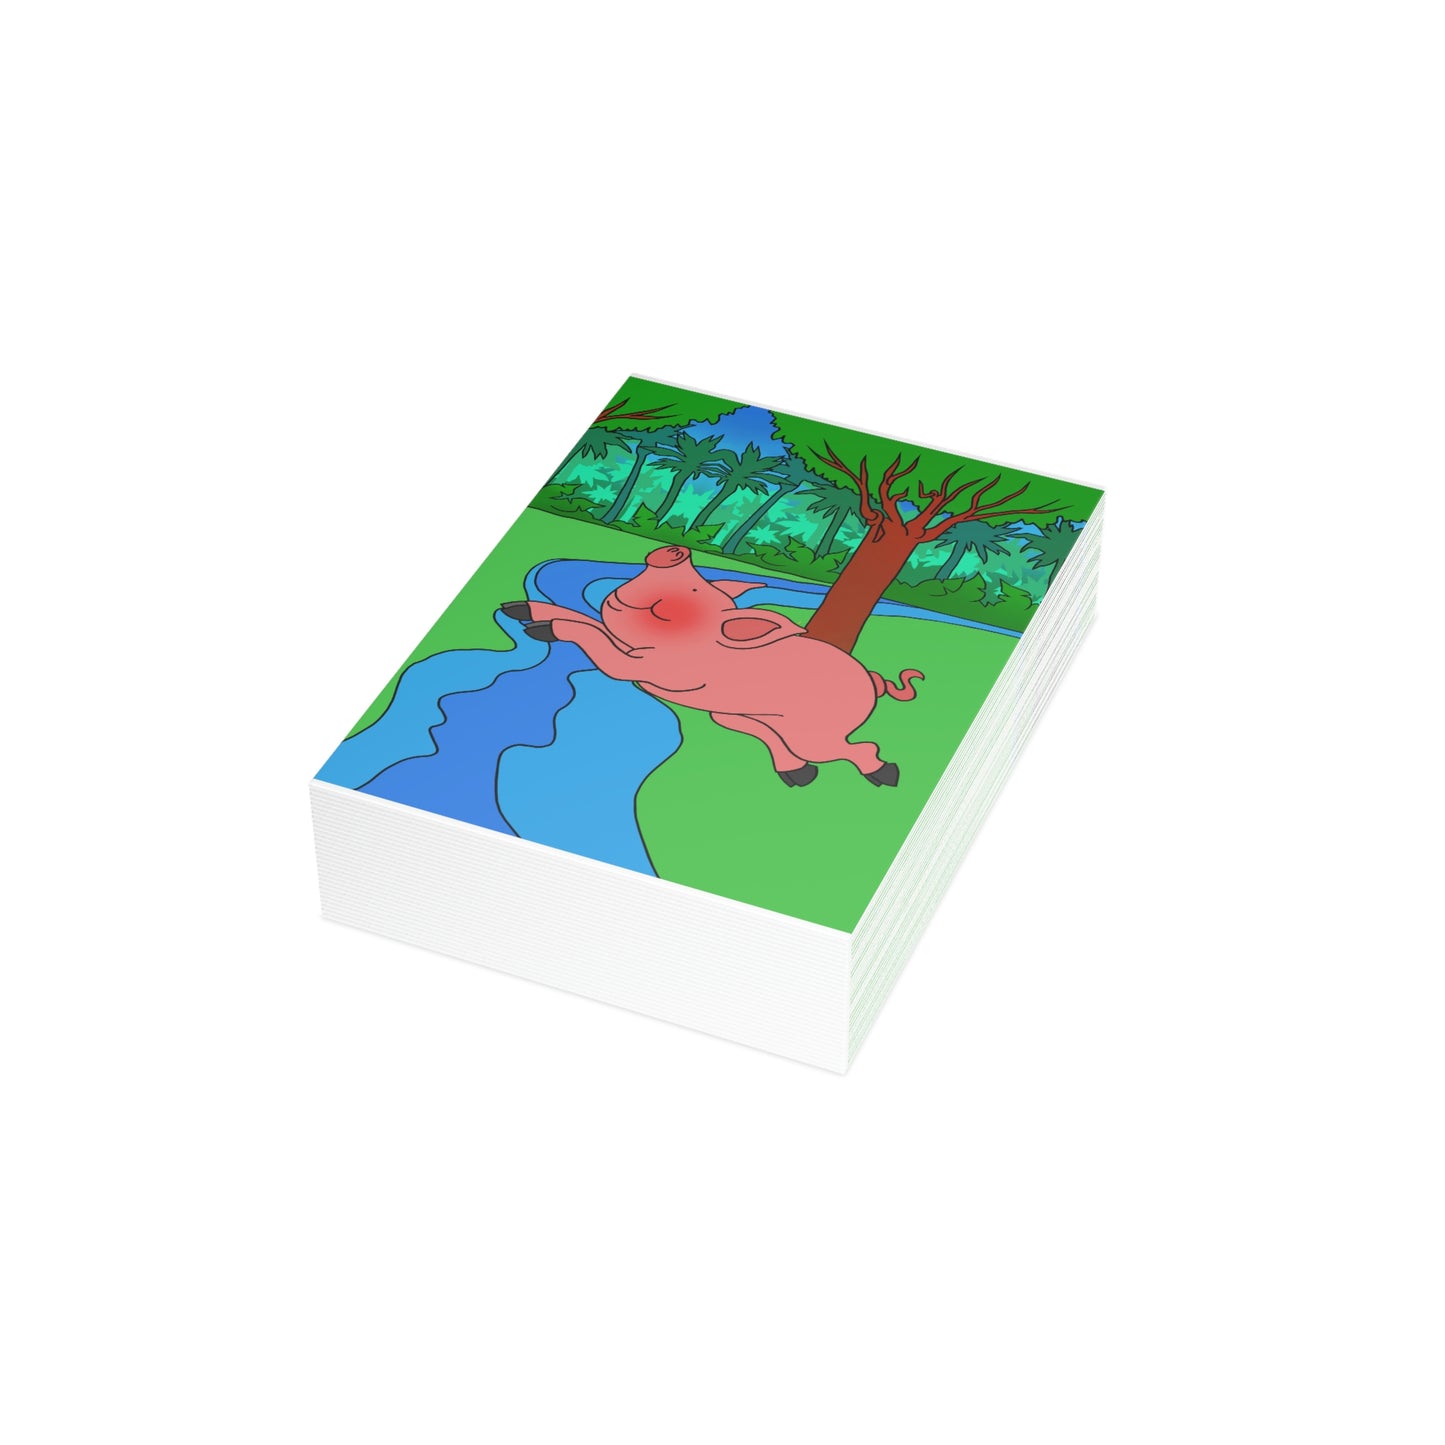 Anansi and the Market Pig! Greeting Card Bundles (envelopes not included)